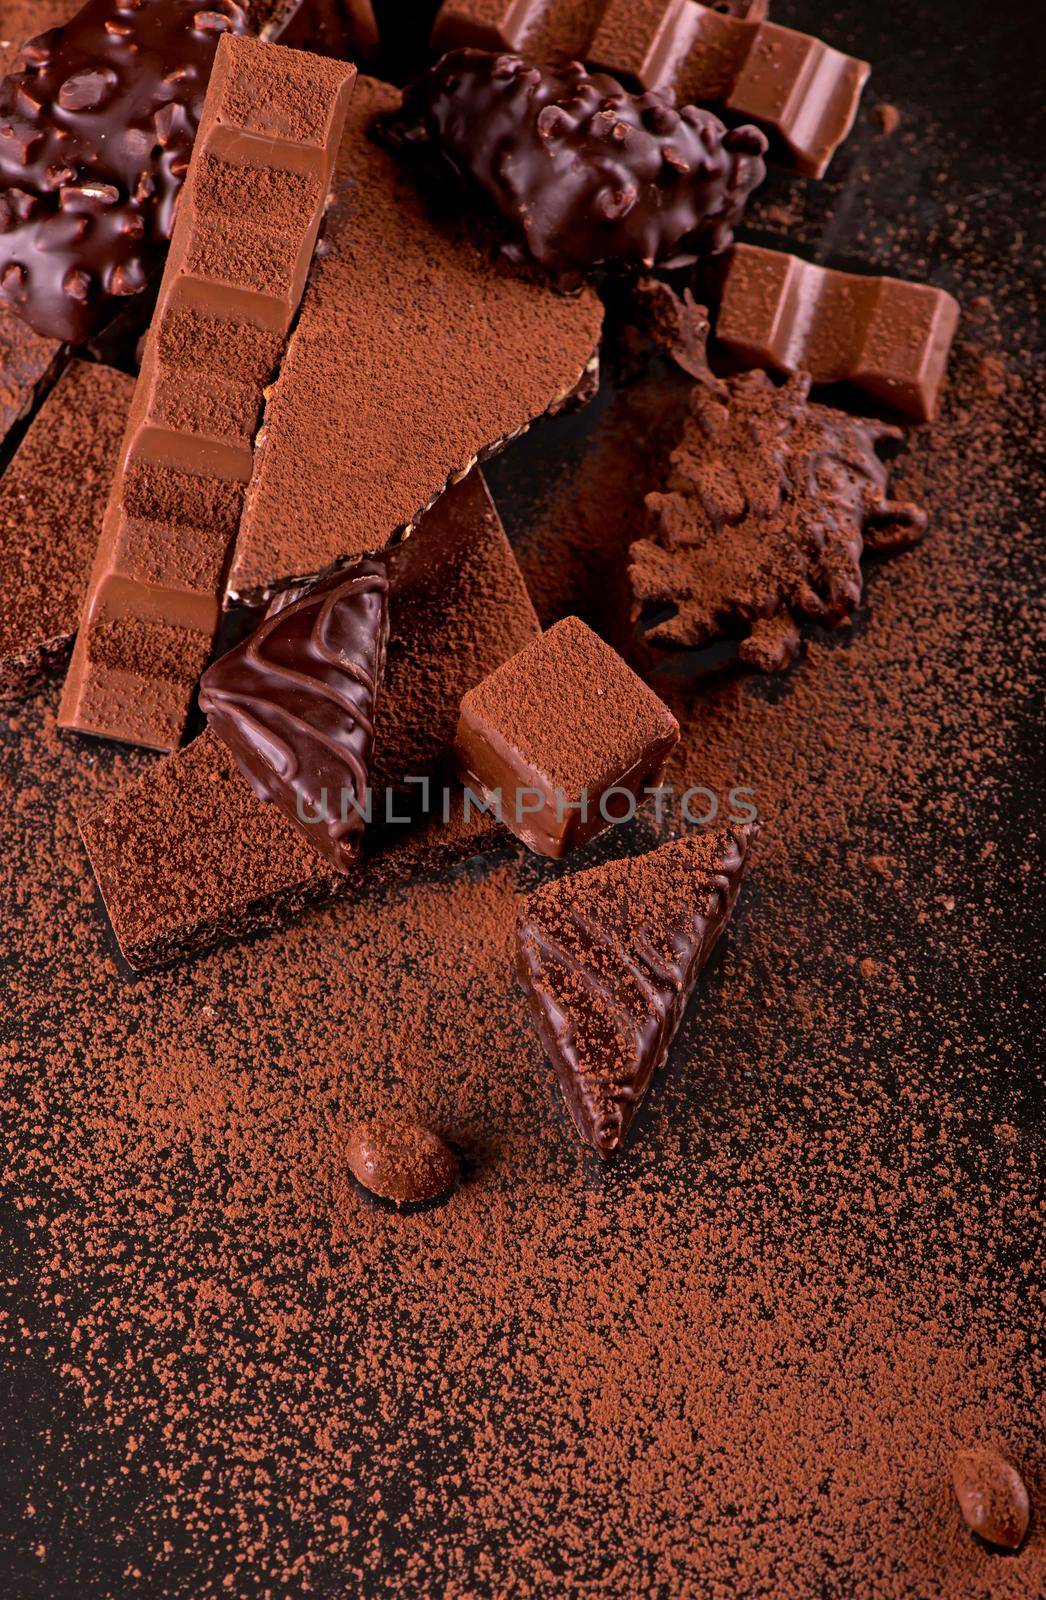 chocolate pieces and cocoa powder on wooden background by aprilphoto